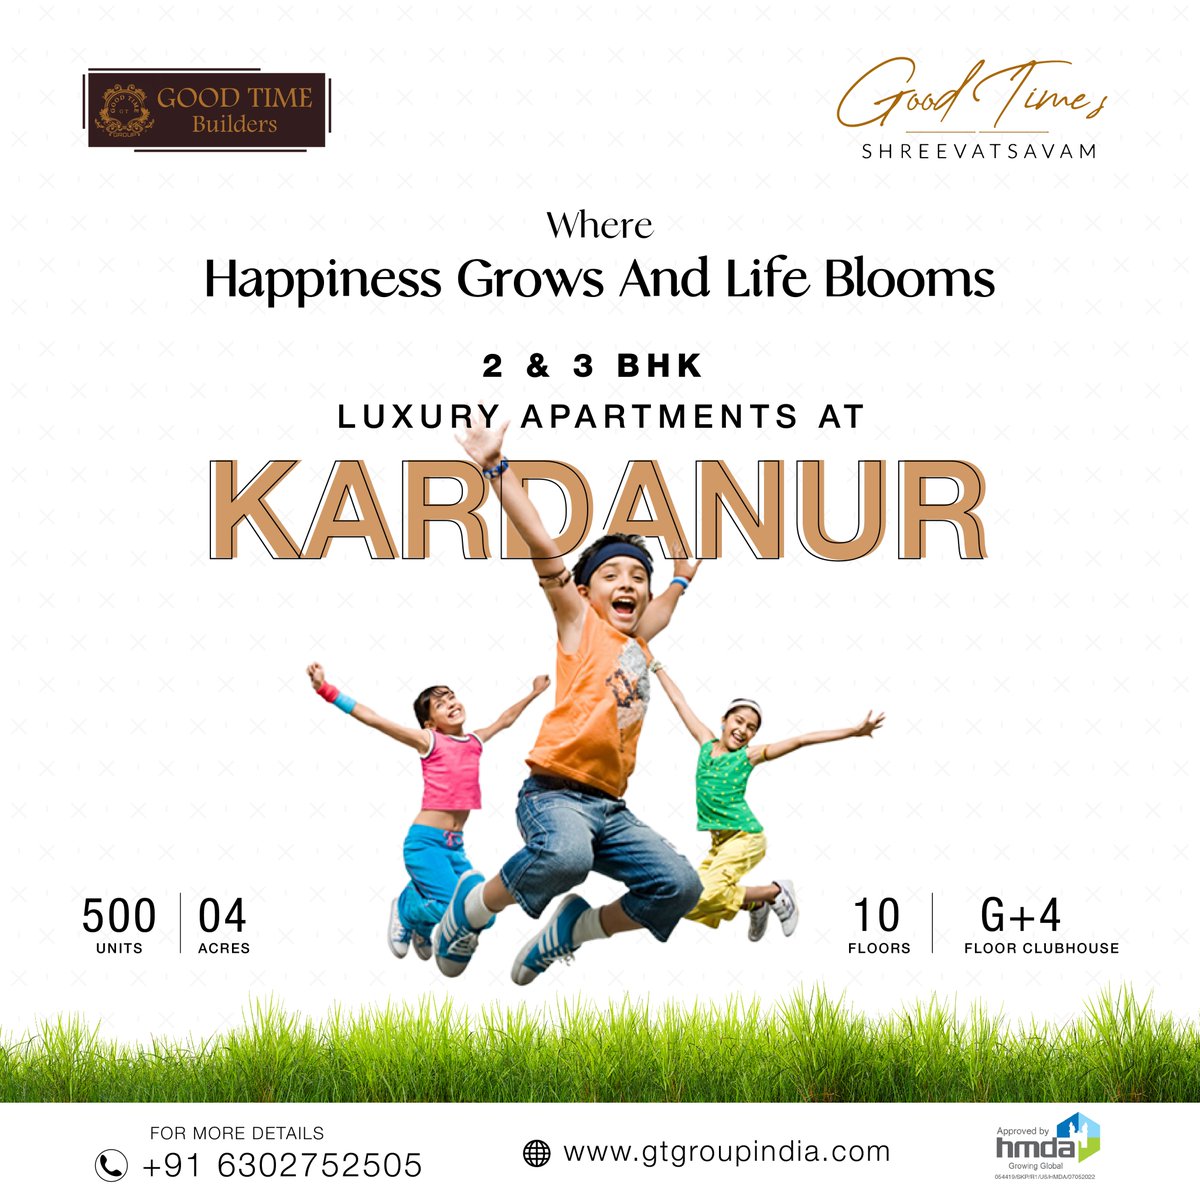 Let your little ones thrive in an environment where happiness soars.
visit our website: gtgroupindia.com/shreevatsavam-…
.
#gtgroupindia #shreevatsavam #apartmentsforsale #realestate #flatsforsale #Hyderabadflats #2and3bhkflats #buynow #2BHK